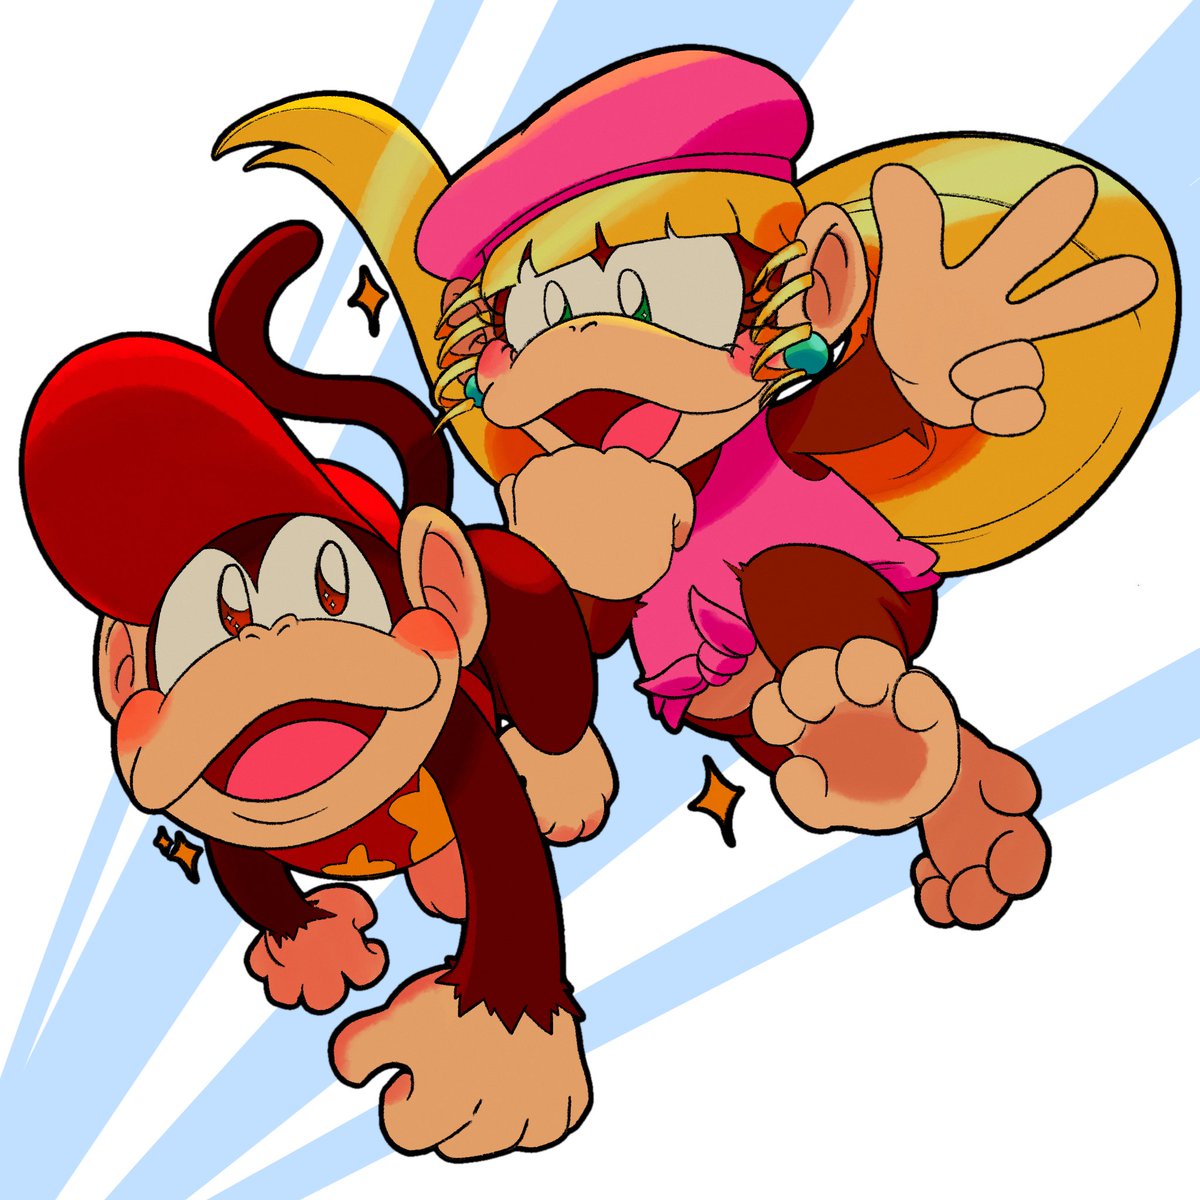 diddy kong and dixie kong 🍌